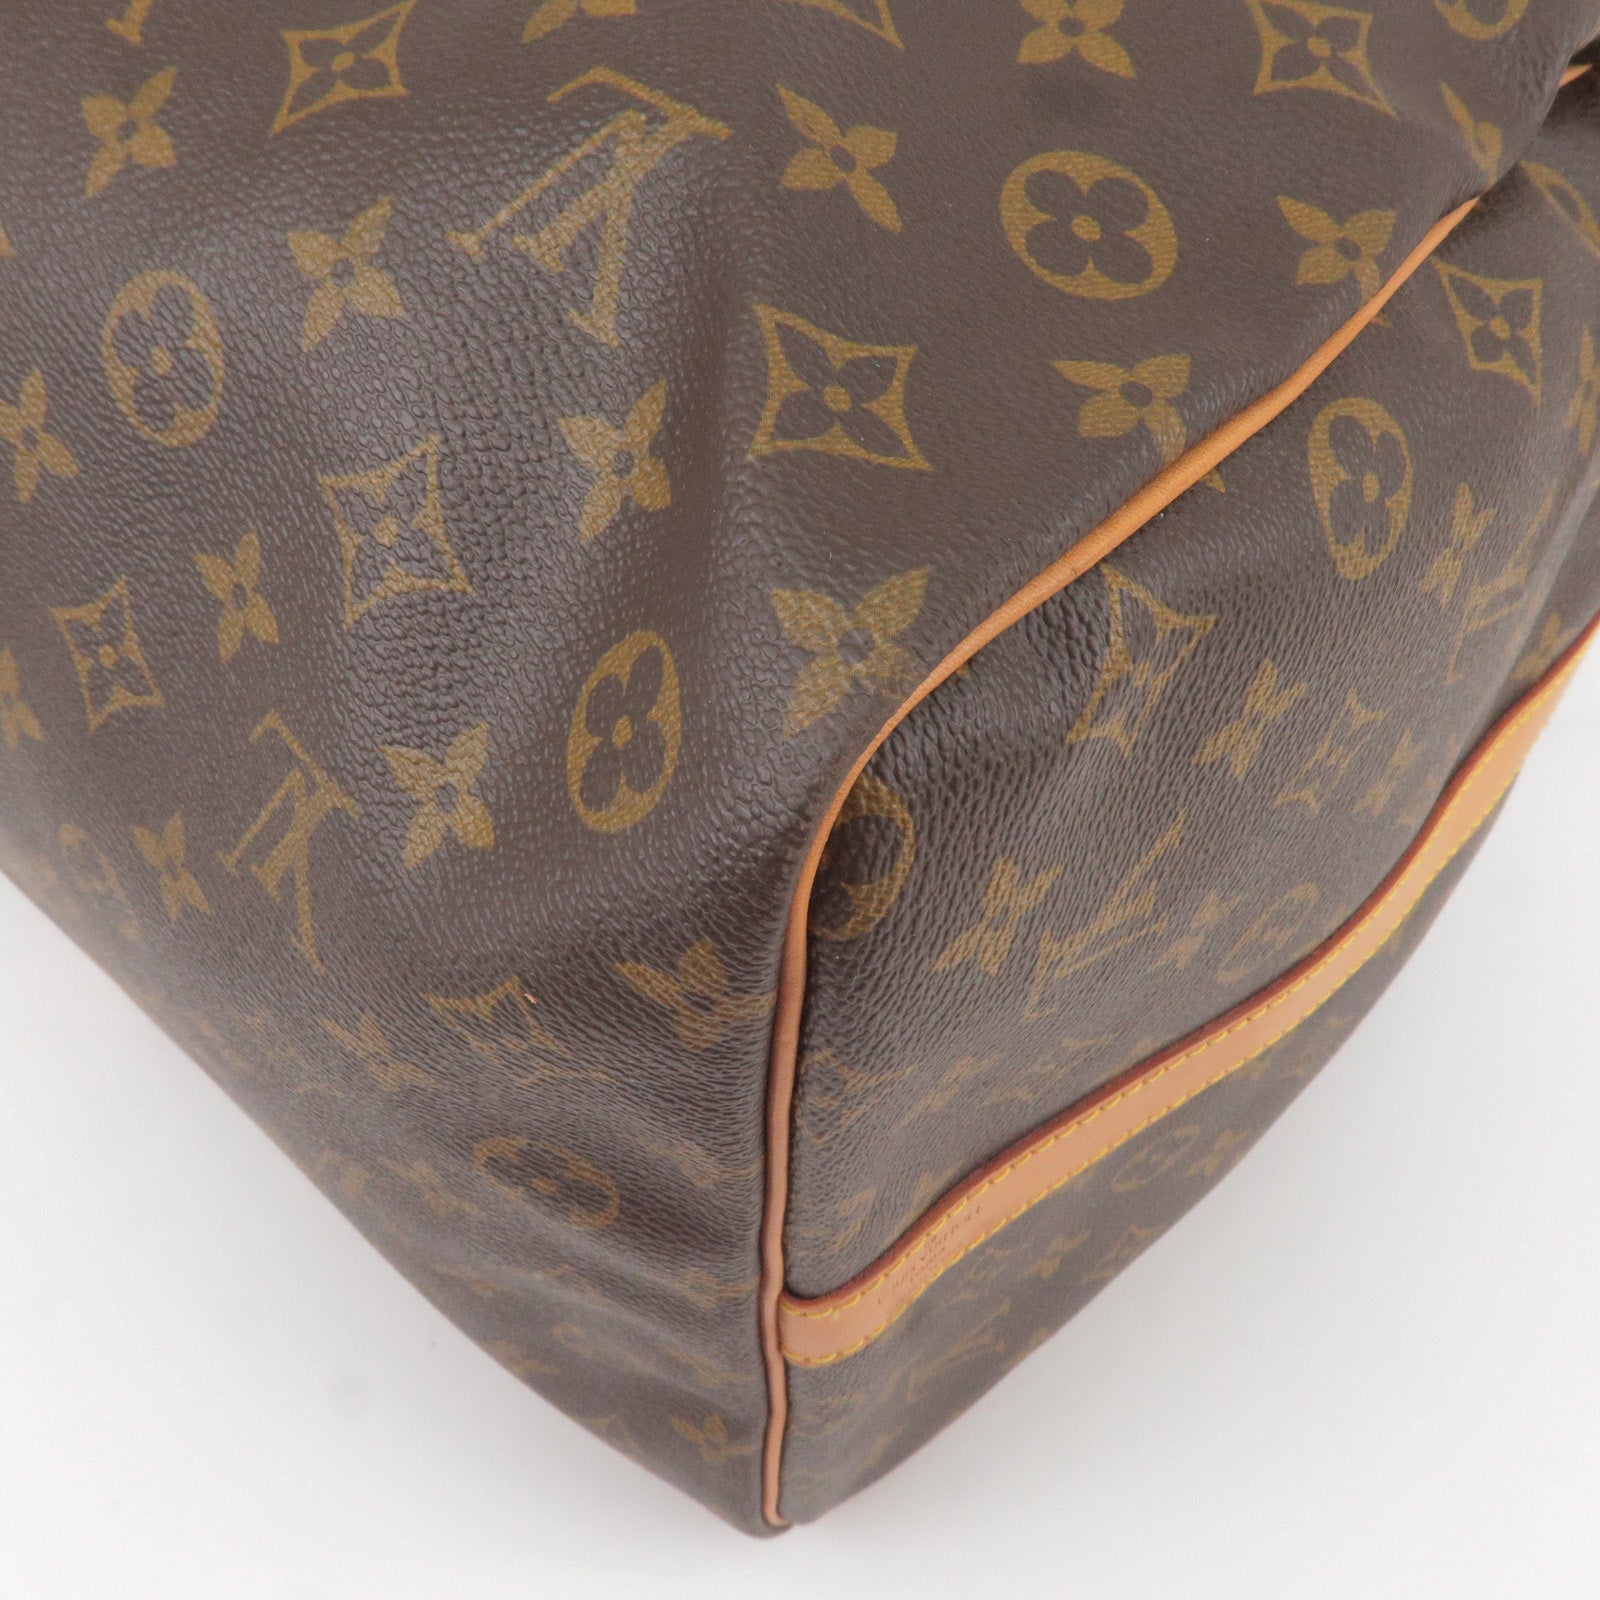 Shop preloved Louis Vuitton with me!